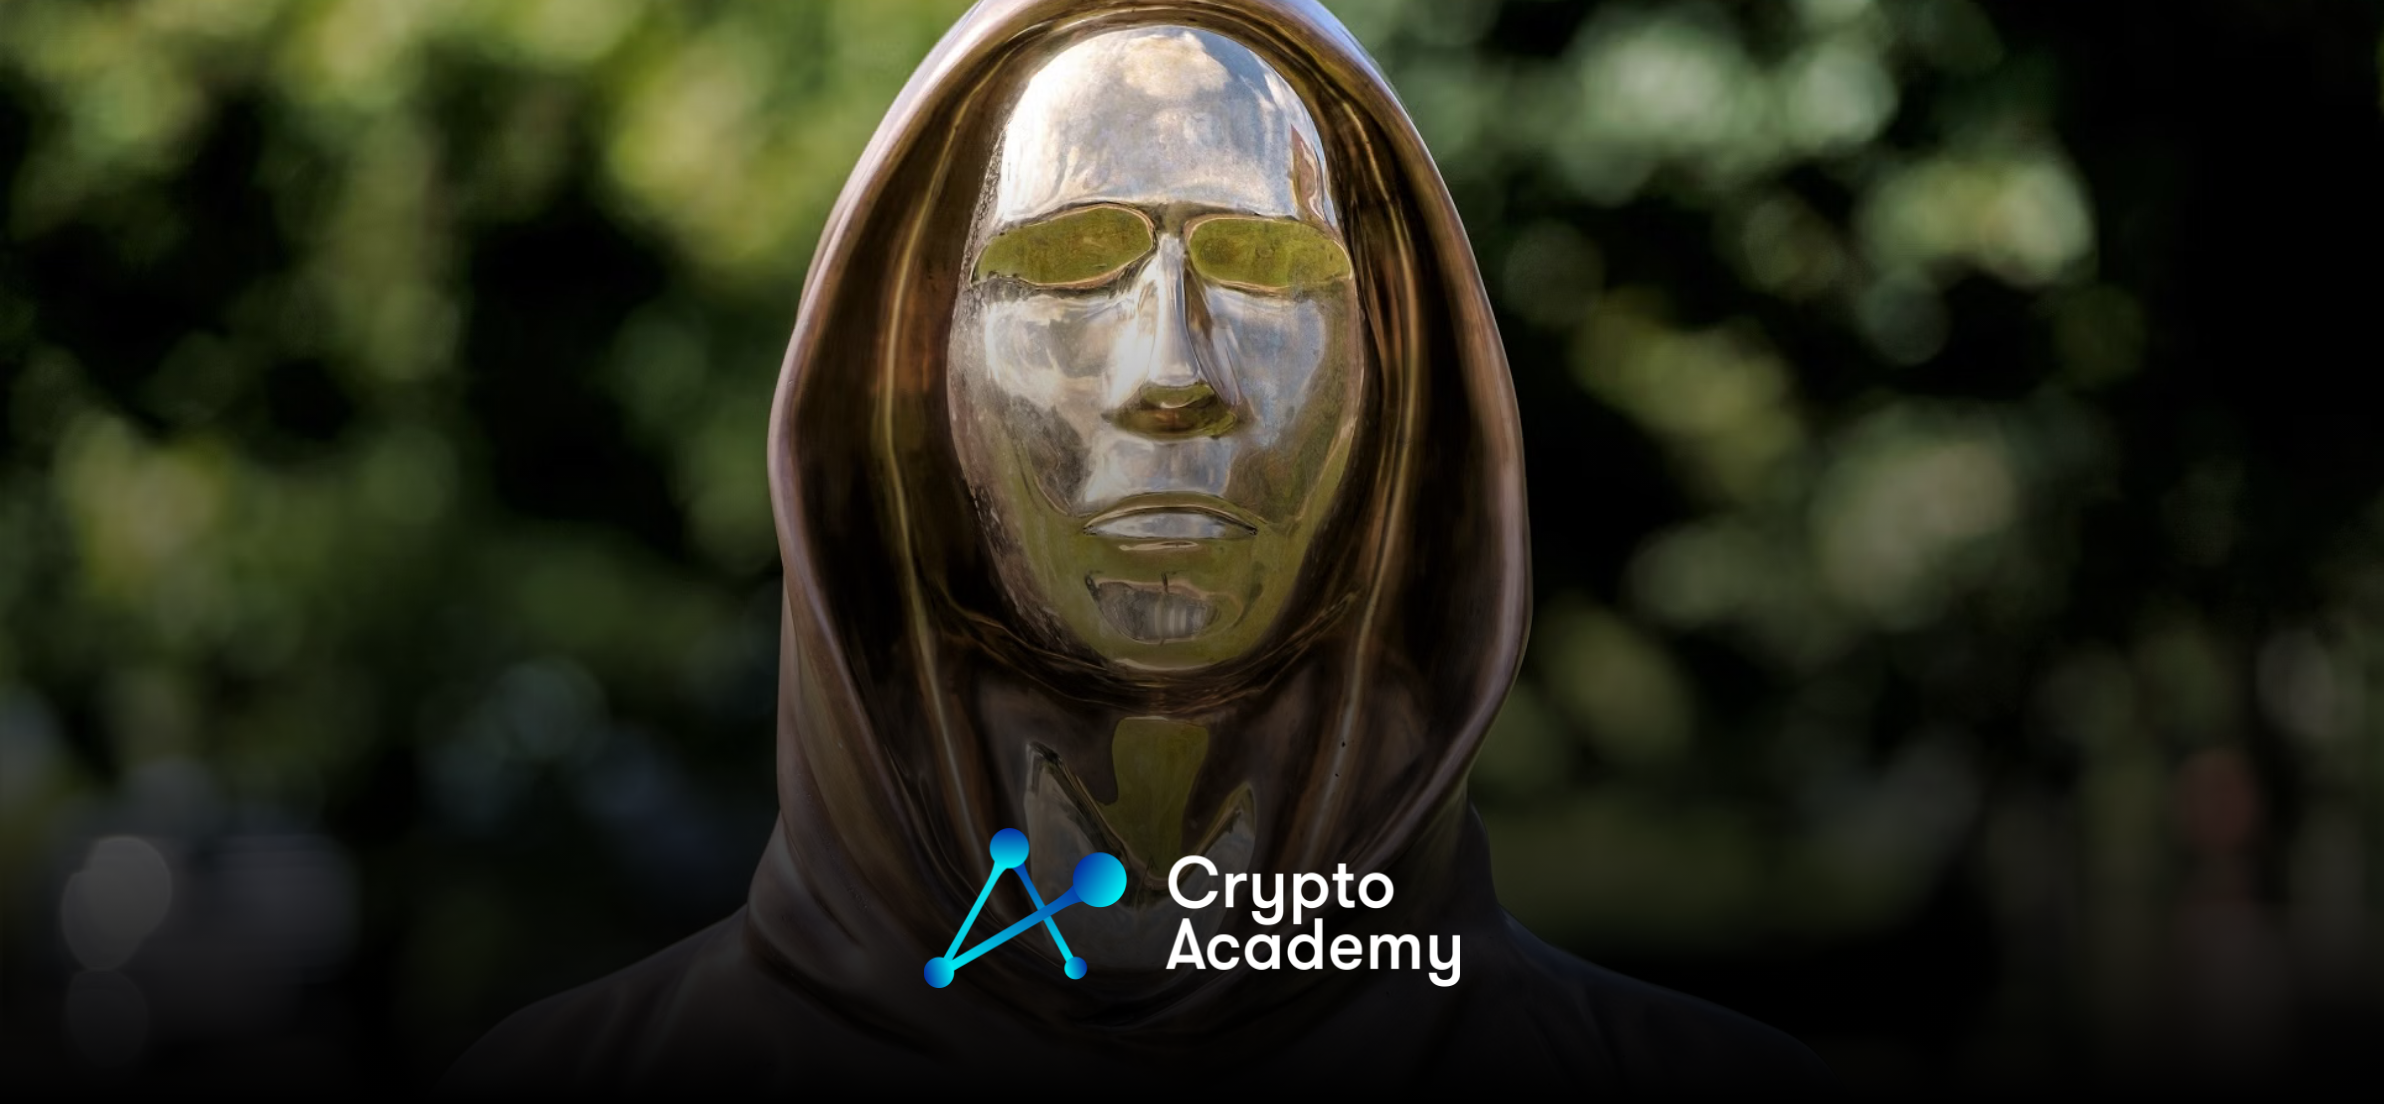 Hal Finney Could Not Have Been Satoshi Nakamoto, Says Bitcoin Researcher